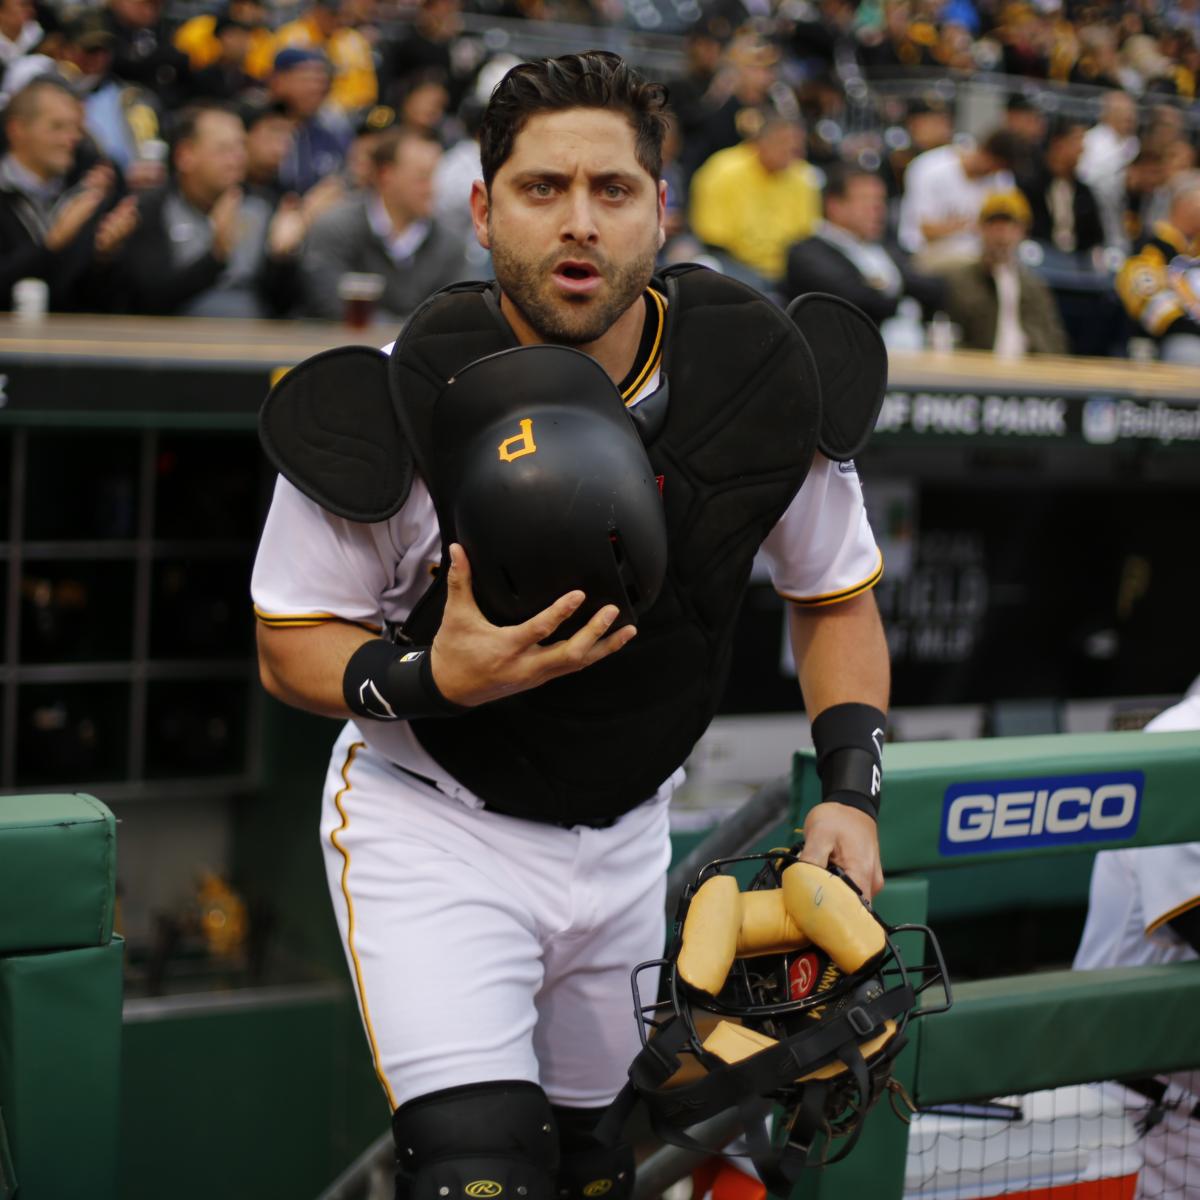 Recovering from another concussion, Pirates catcher Francisco Cervelli  denies report and says his 'hope is to catch again